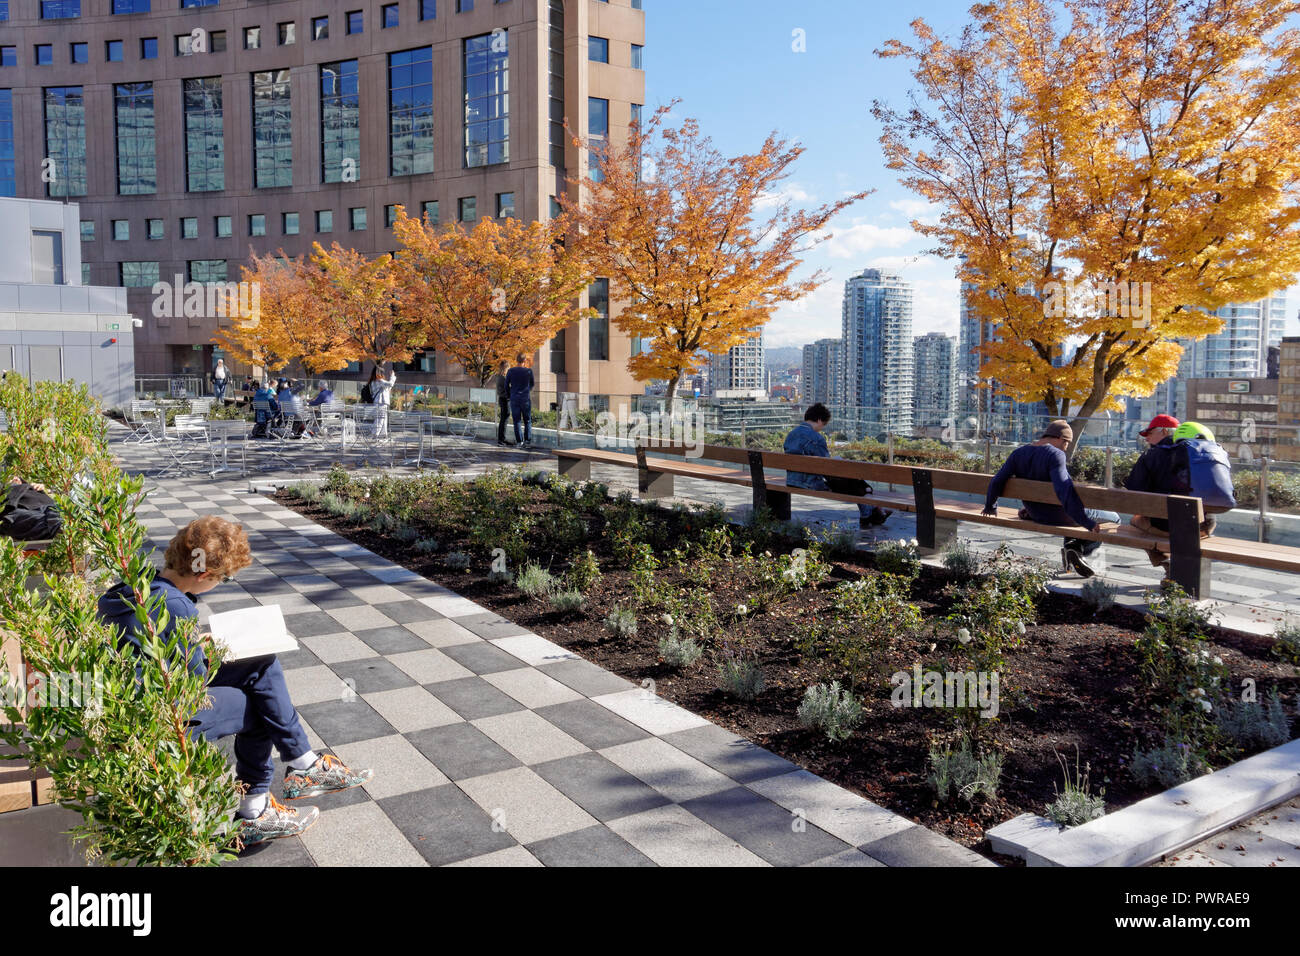 The Vancouver Public Library rooftop garden that opened on September 29, 2018, Vancouver, BC, Canada Stock Photo